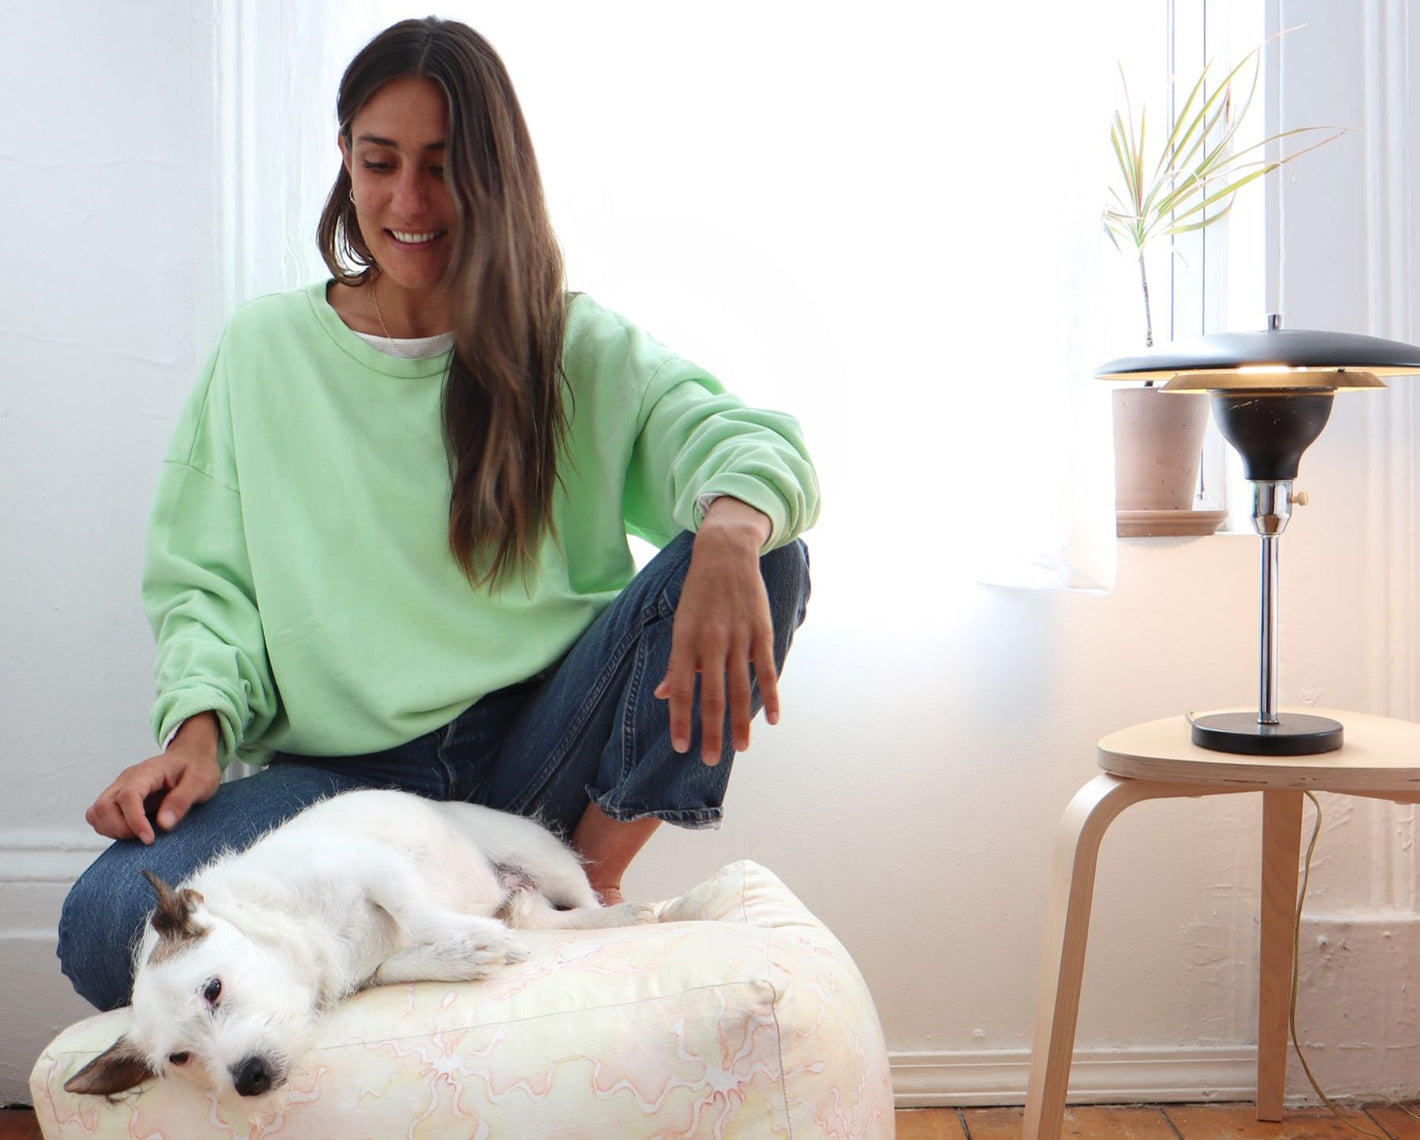 A woman sitting on a bean bag chair with a dog